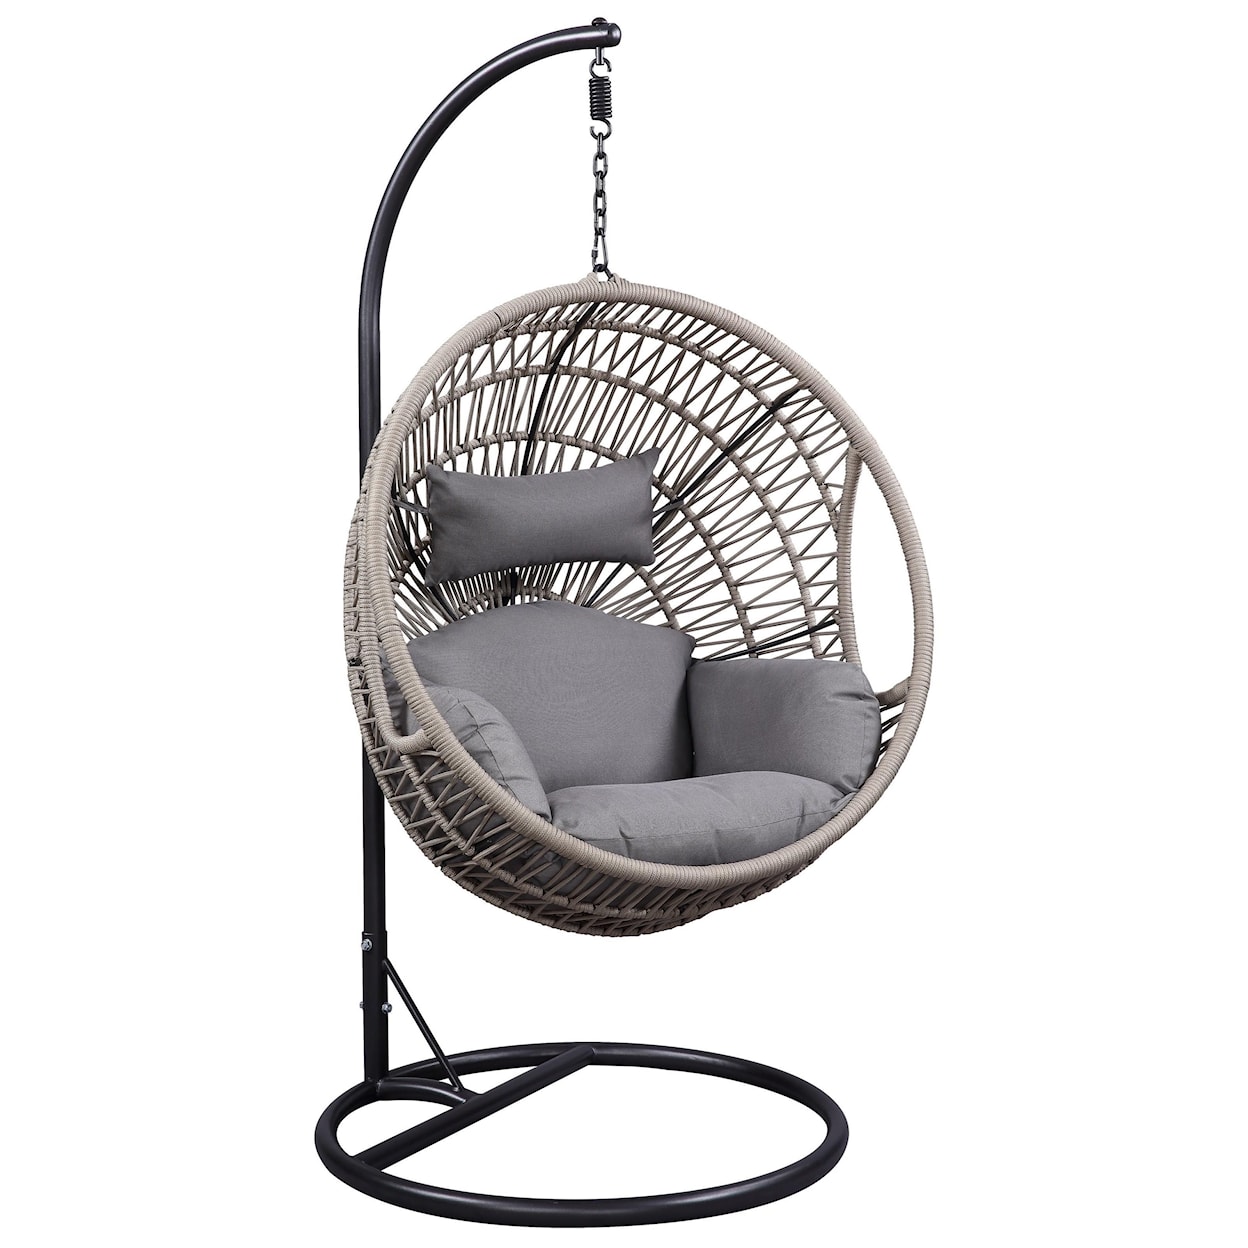 Acme Furniture Vasant Patio Swing Chair with Stand